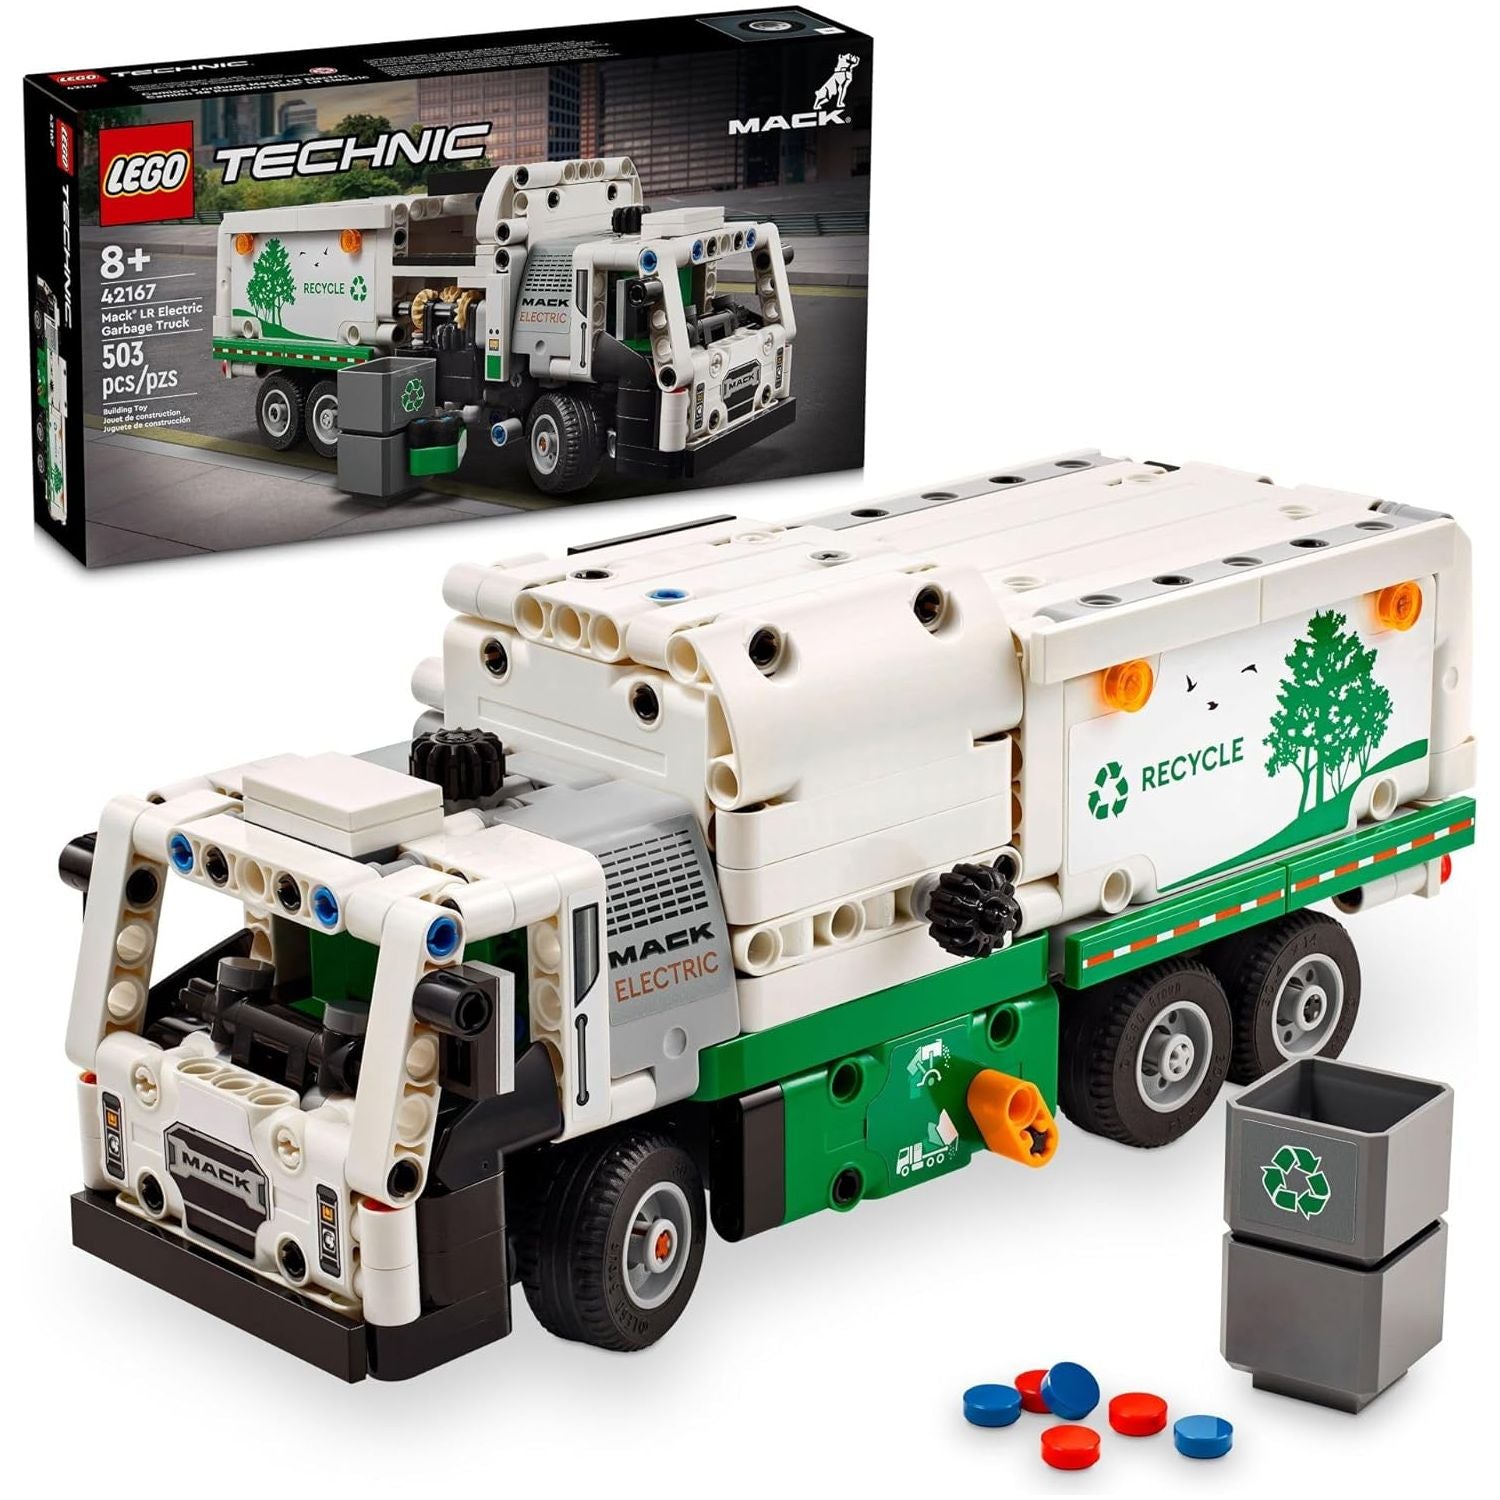 LEGO 42167 Technic Mack LR Electric Garbage Truck Toy, Buildable Kids Truck for Pretend Play.